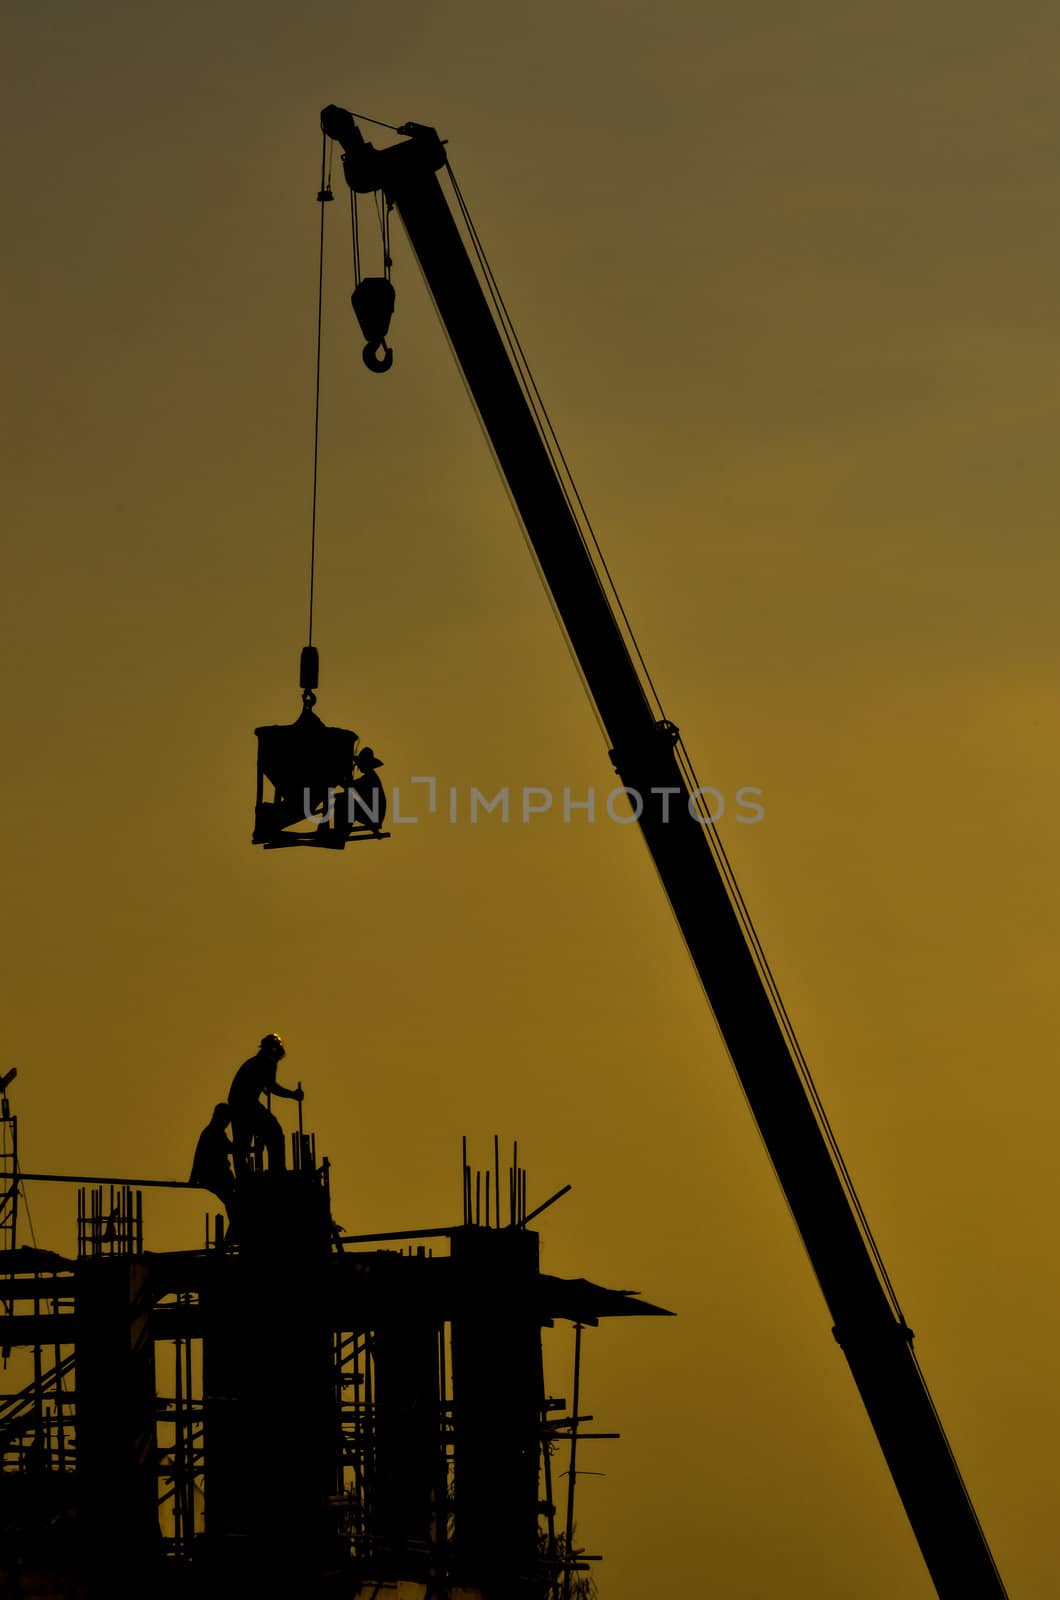 Silhouette of construction site